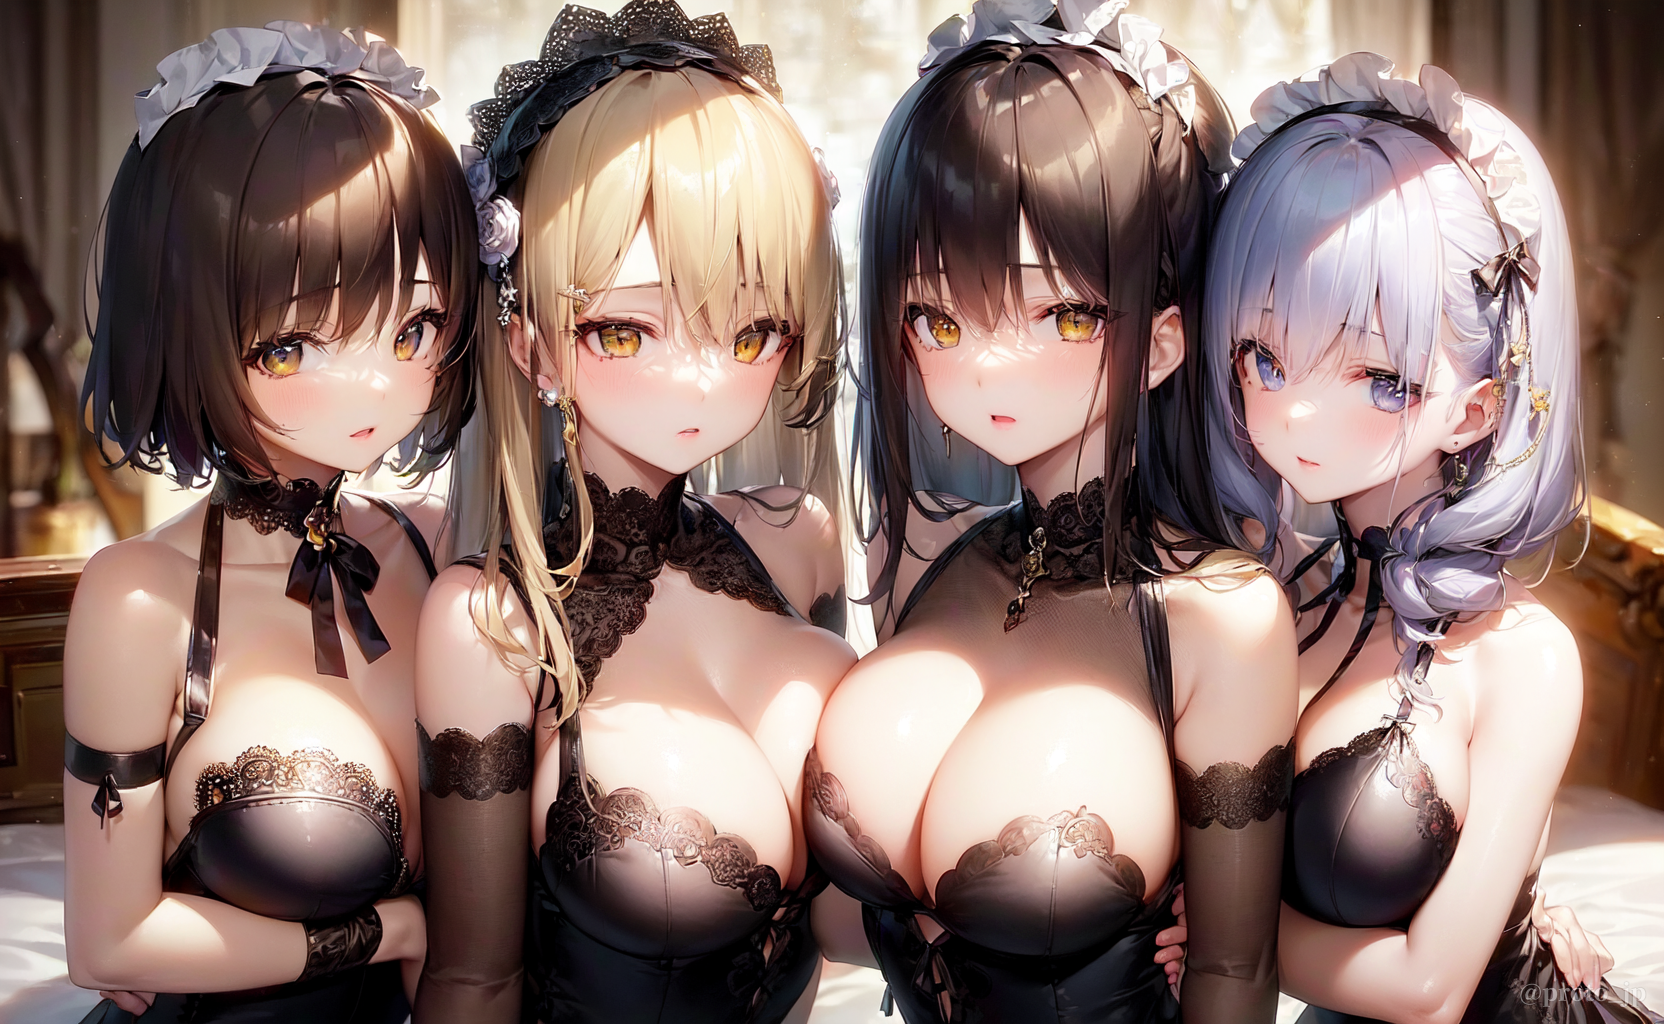 Anime 1664x1024 AI art PROTO@AiArt Pixiv harem group of women cleavage anime girls big boobs elbow gloves bow tie looking at viewer maid maid outfit earring jewelry lingerie line-up women quartet boobs on boobs blushing boobs lined up indoors